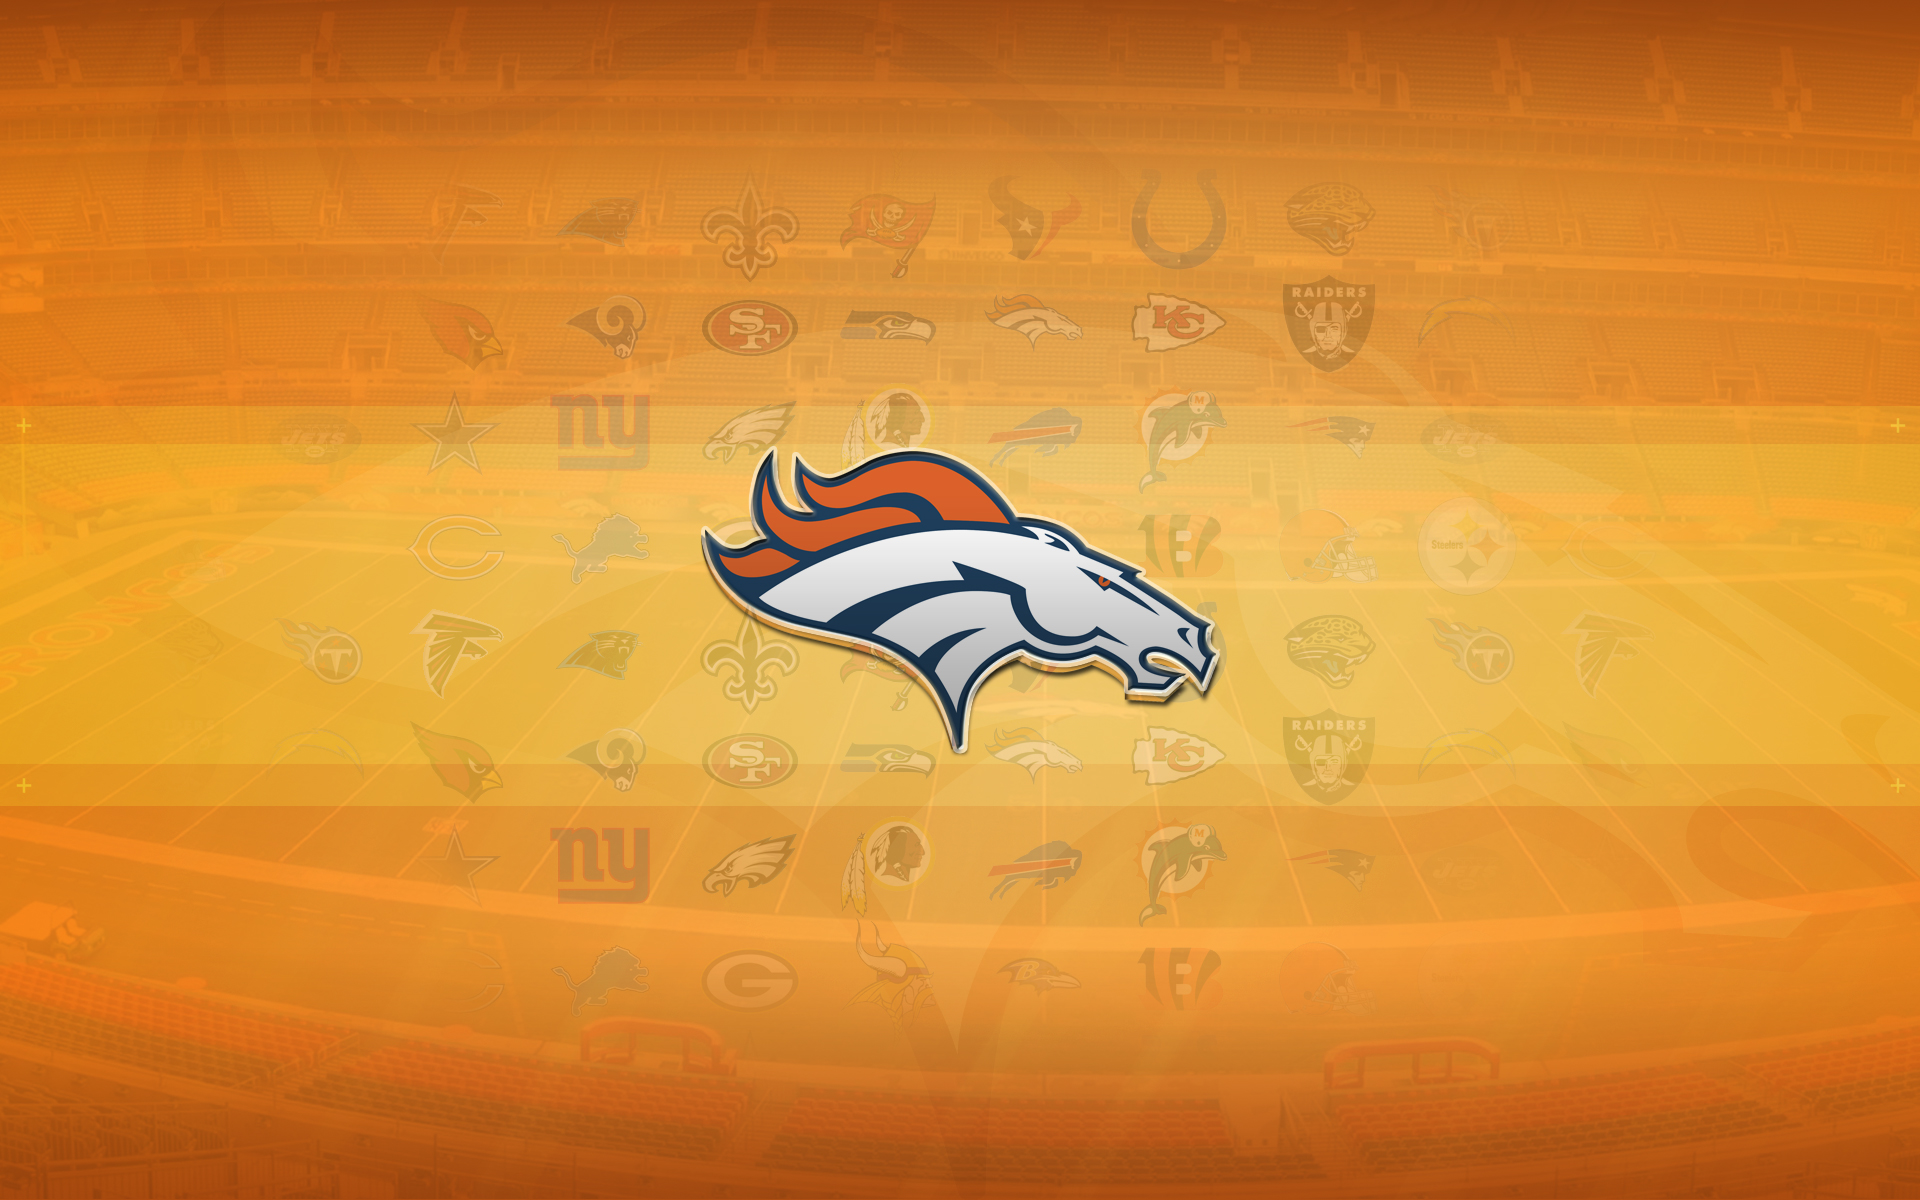 Denver Broncos Wallpapers For Facebook Full Hd Pictures 1920x1200